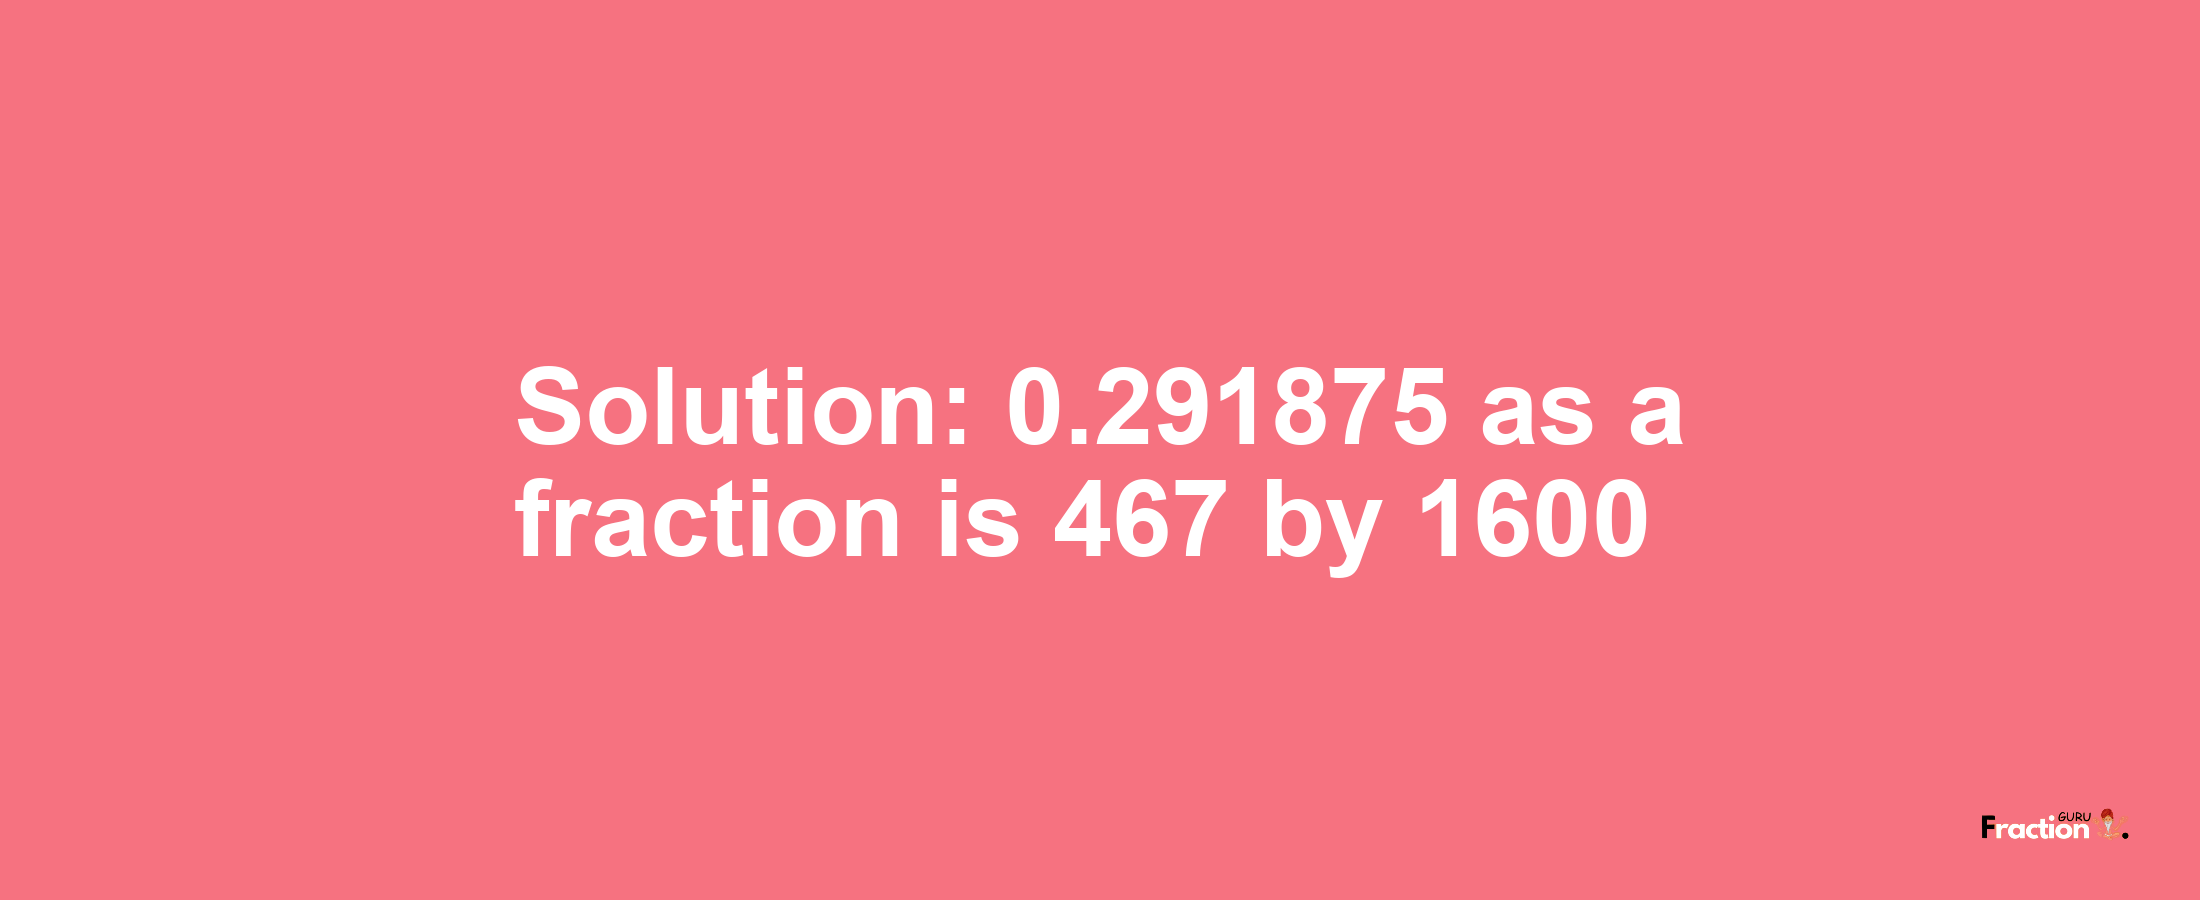 Solution:0.291875 as a fraction is 467/1600